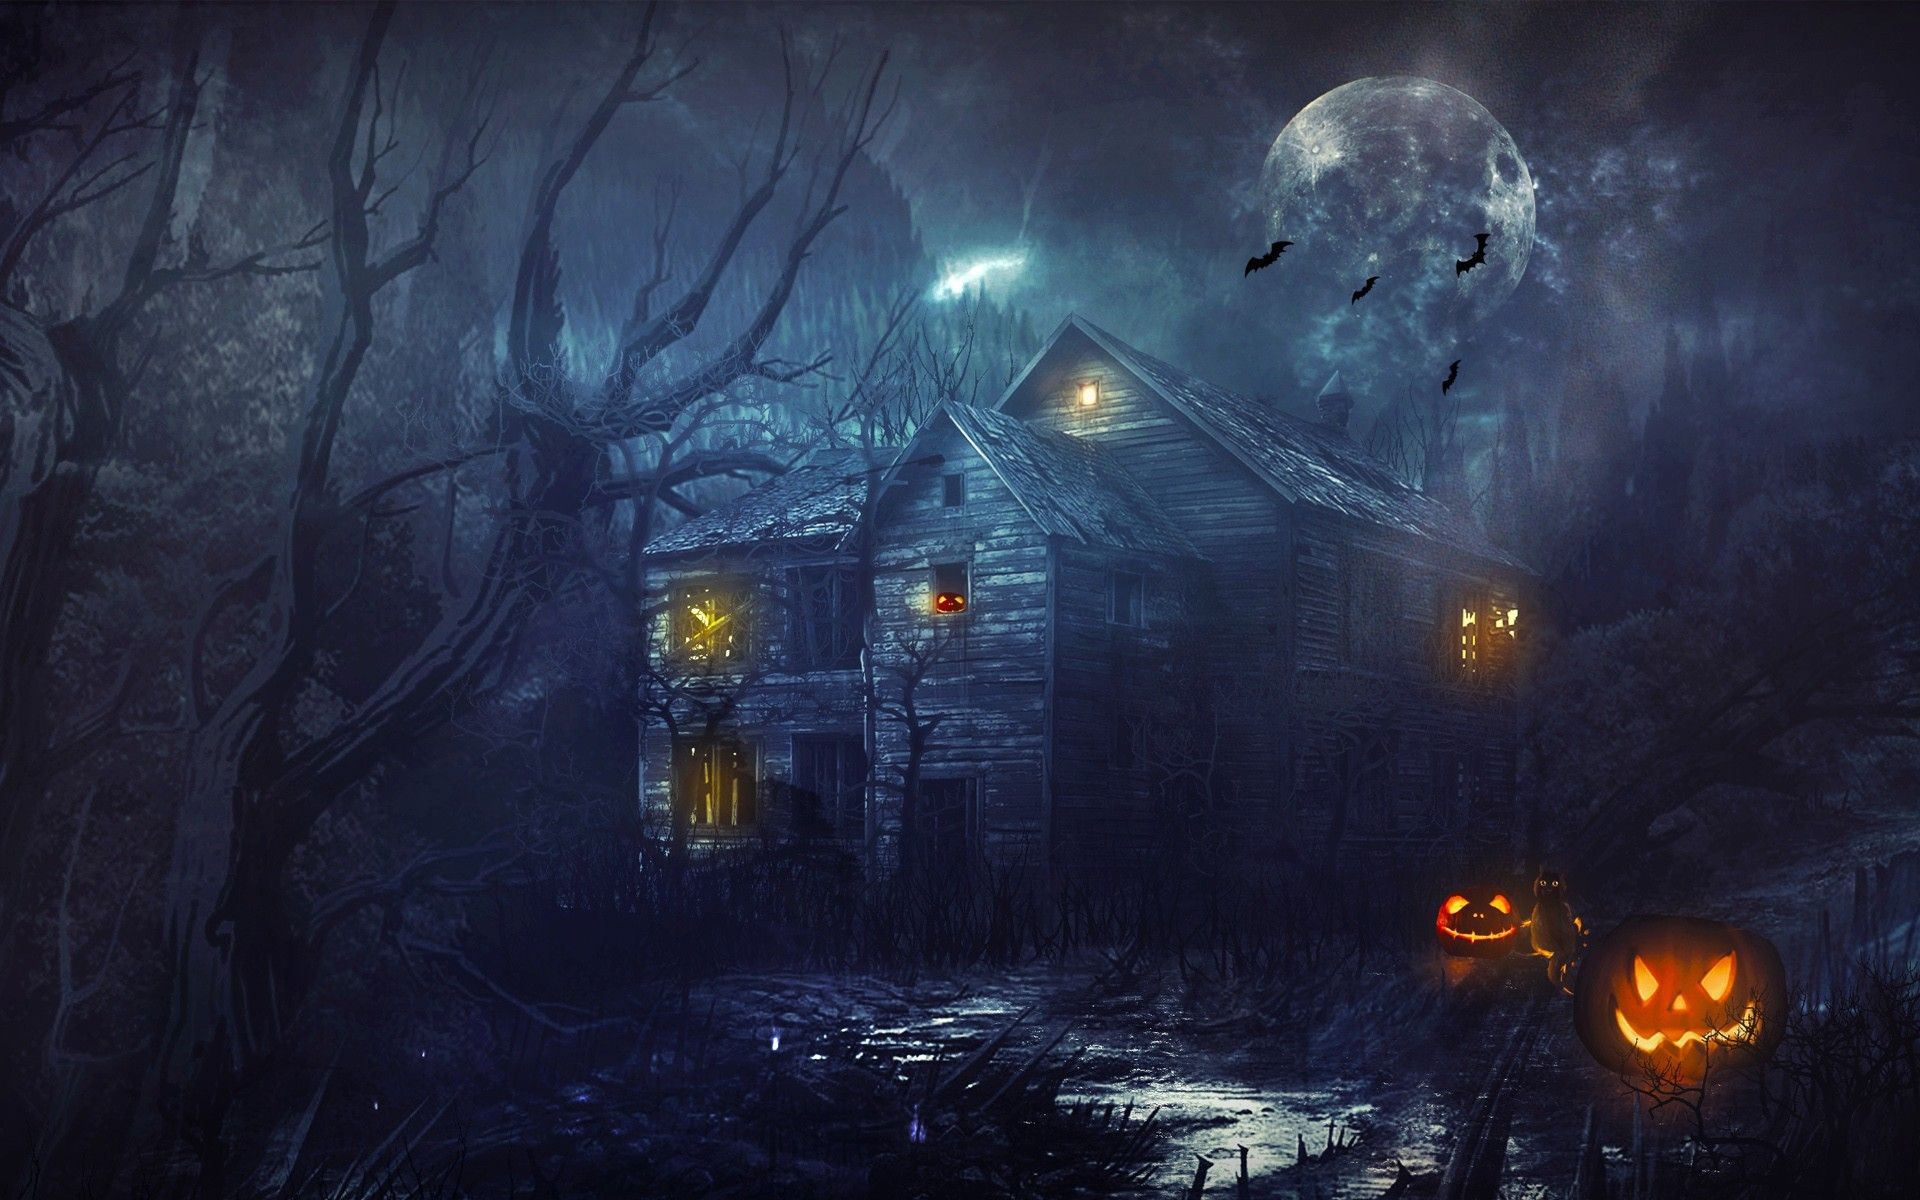 Wooden house in the woods during Halloween wallpaper and image, picture, photo